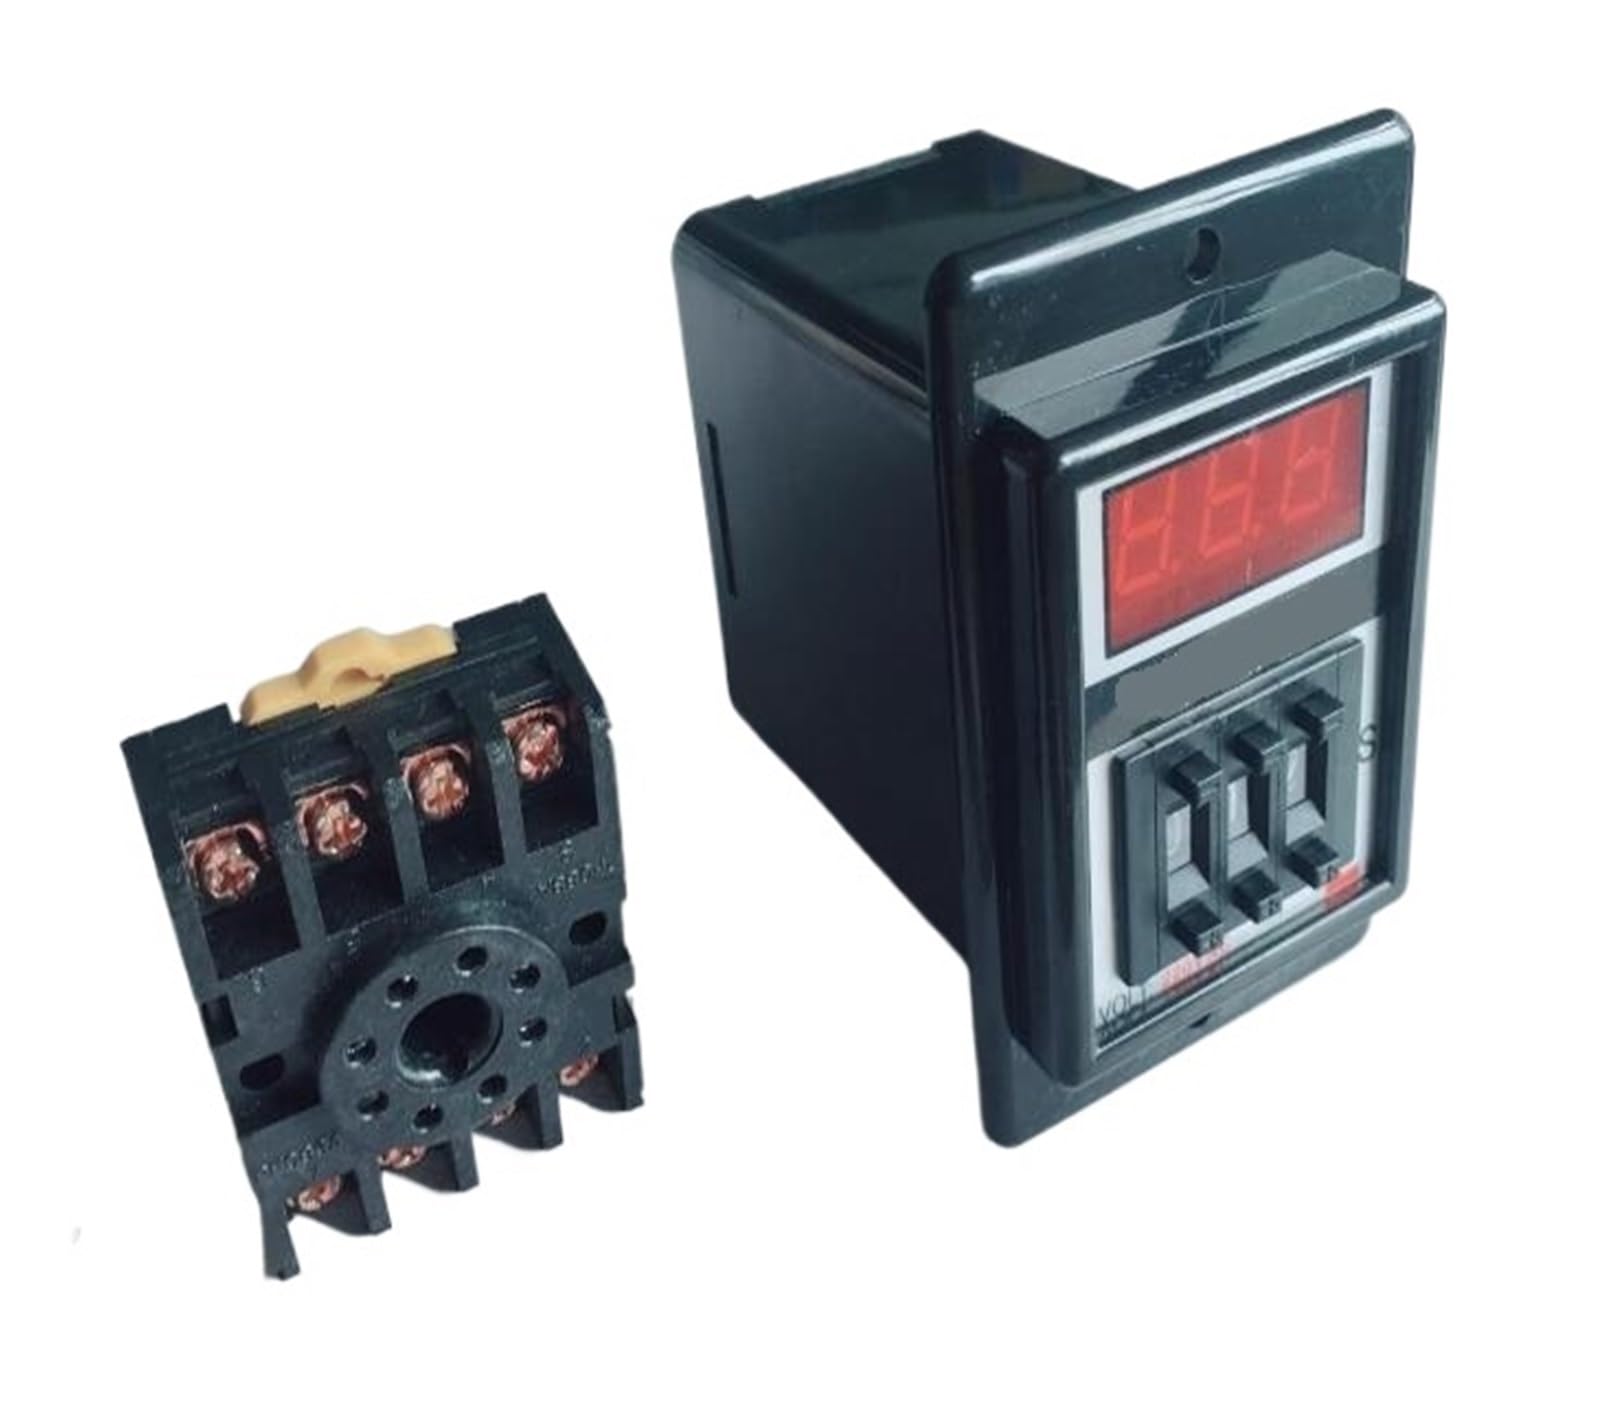 1-999S 1-99.9S 1-999M digits programmable timer delay relay ASY-3D Delay Timer Time Relay 8PIN with base NWPNLXEA(ASY-3D 99.9S,AC110V) von NWPNLXEA